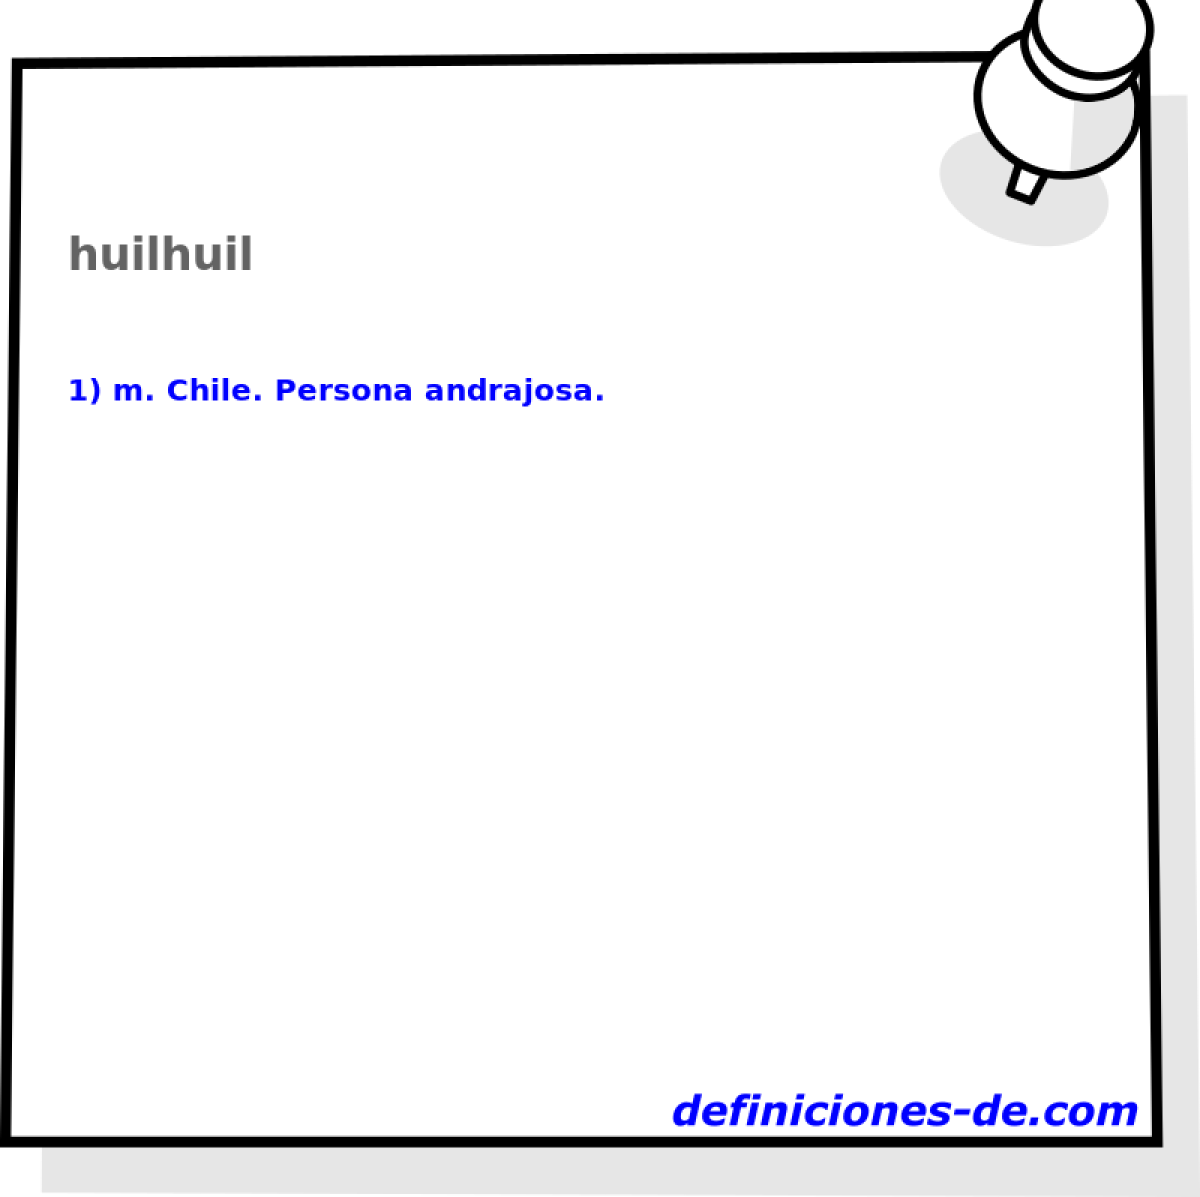 huilhuil 